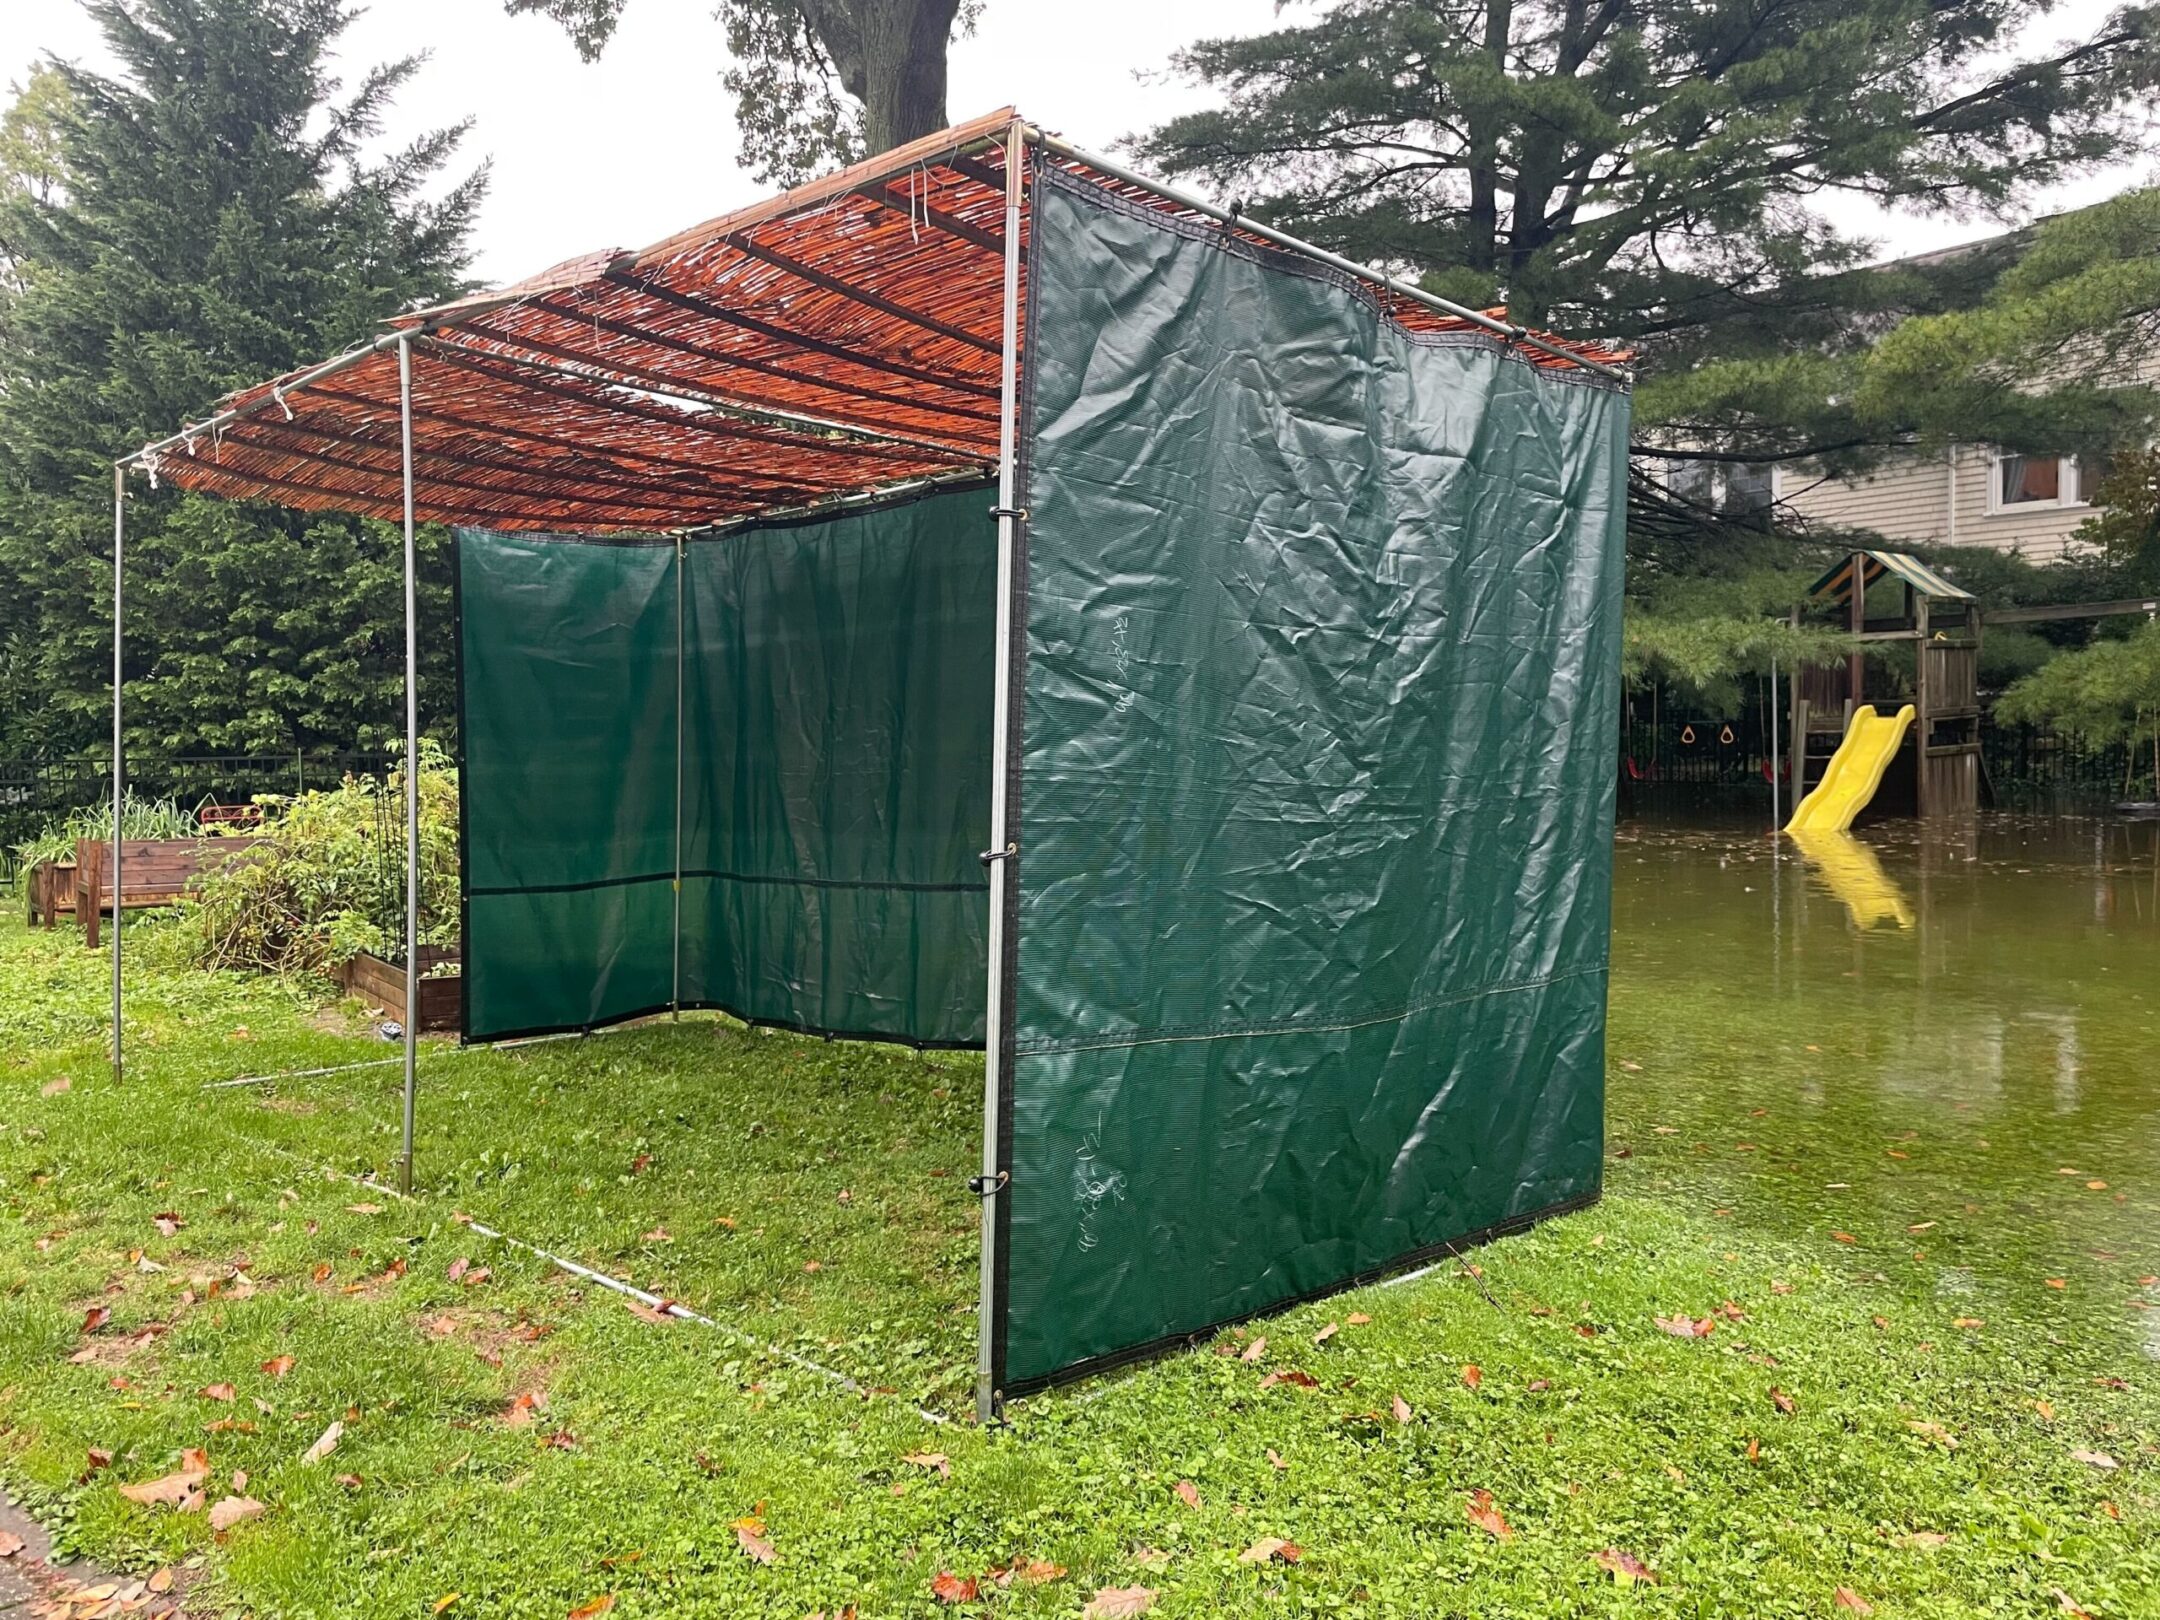 Flash floods put a dangerous damper on the first night of Sukkot in NYC – Jewish Telegraphic Agency